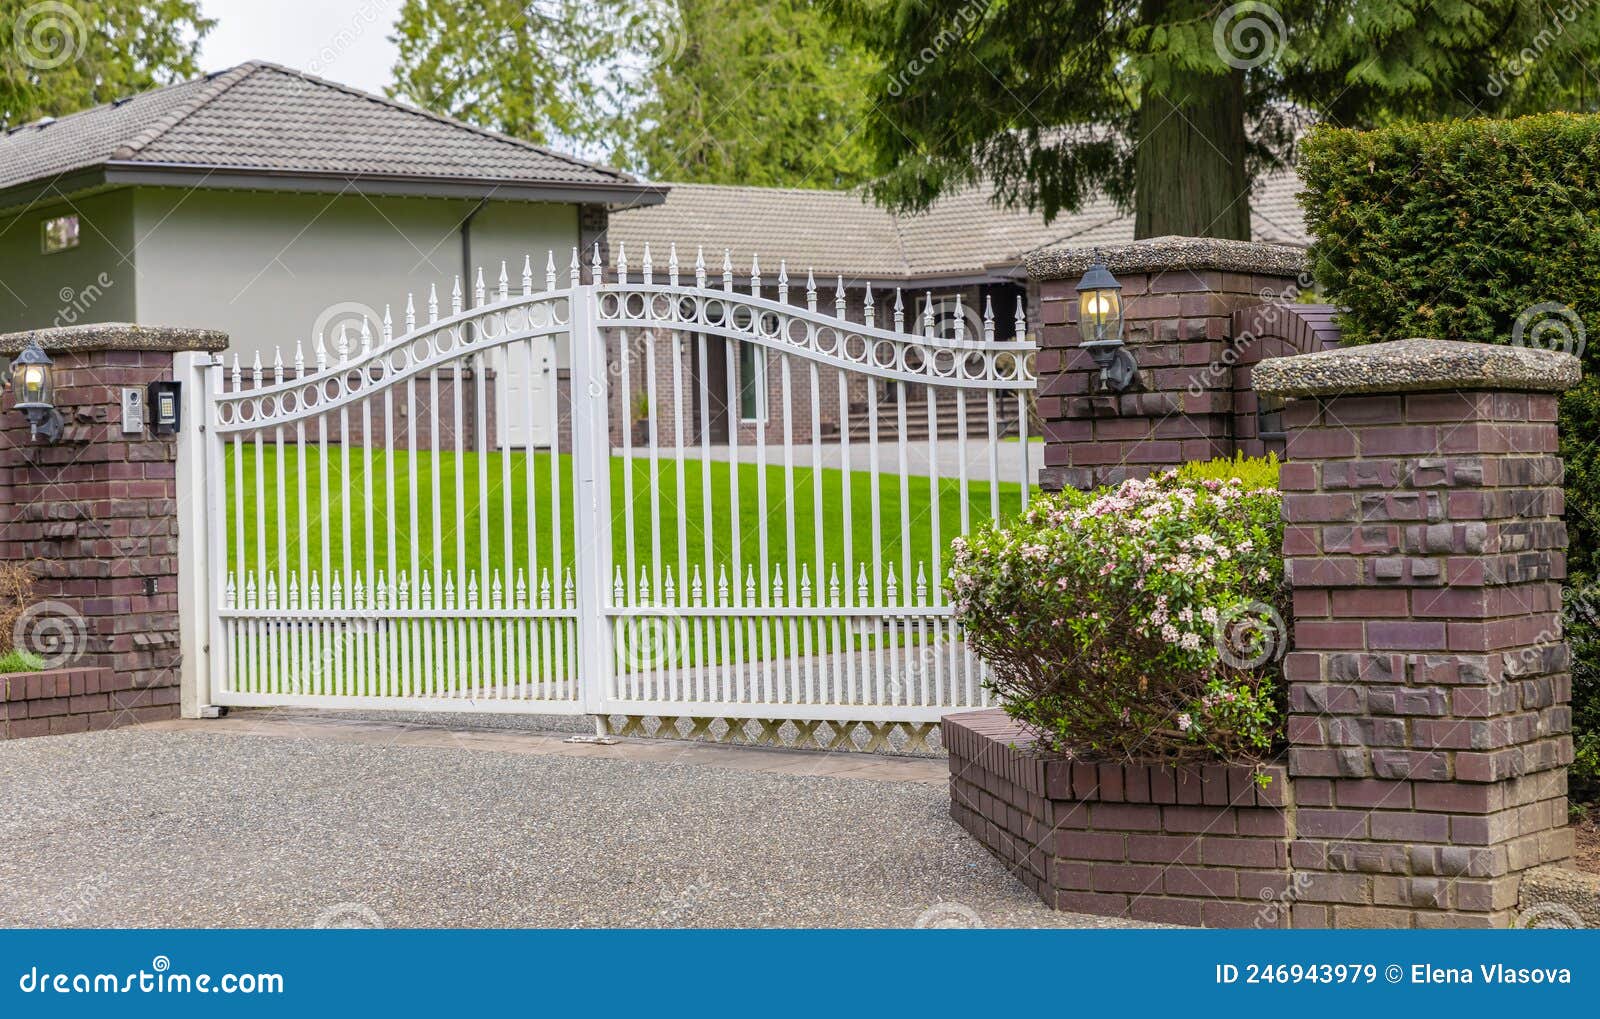 Iron Front Gate of a Luxury Home. Wrought Iron White Gate and ...